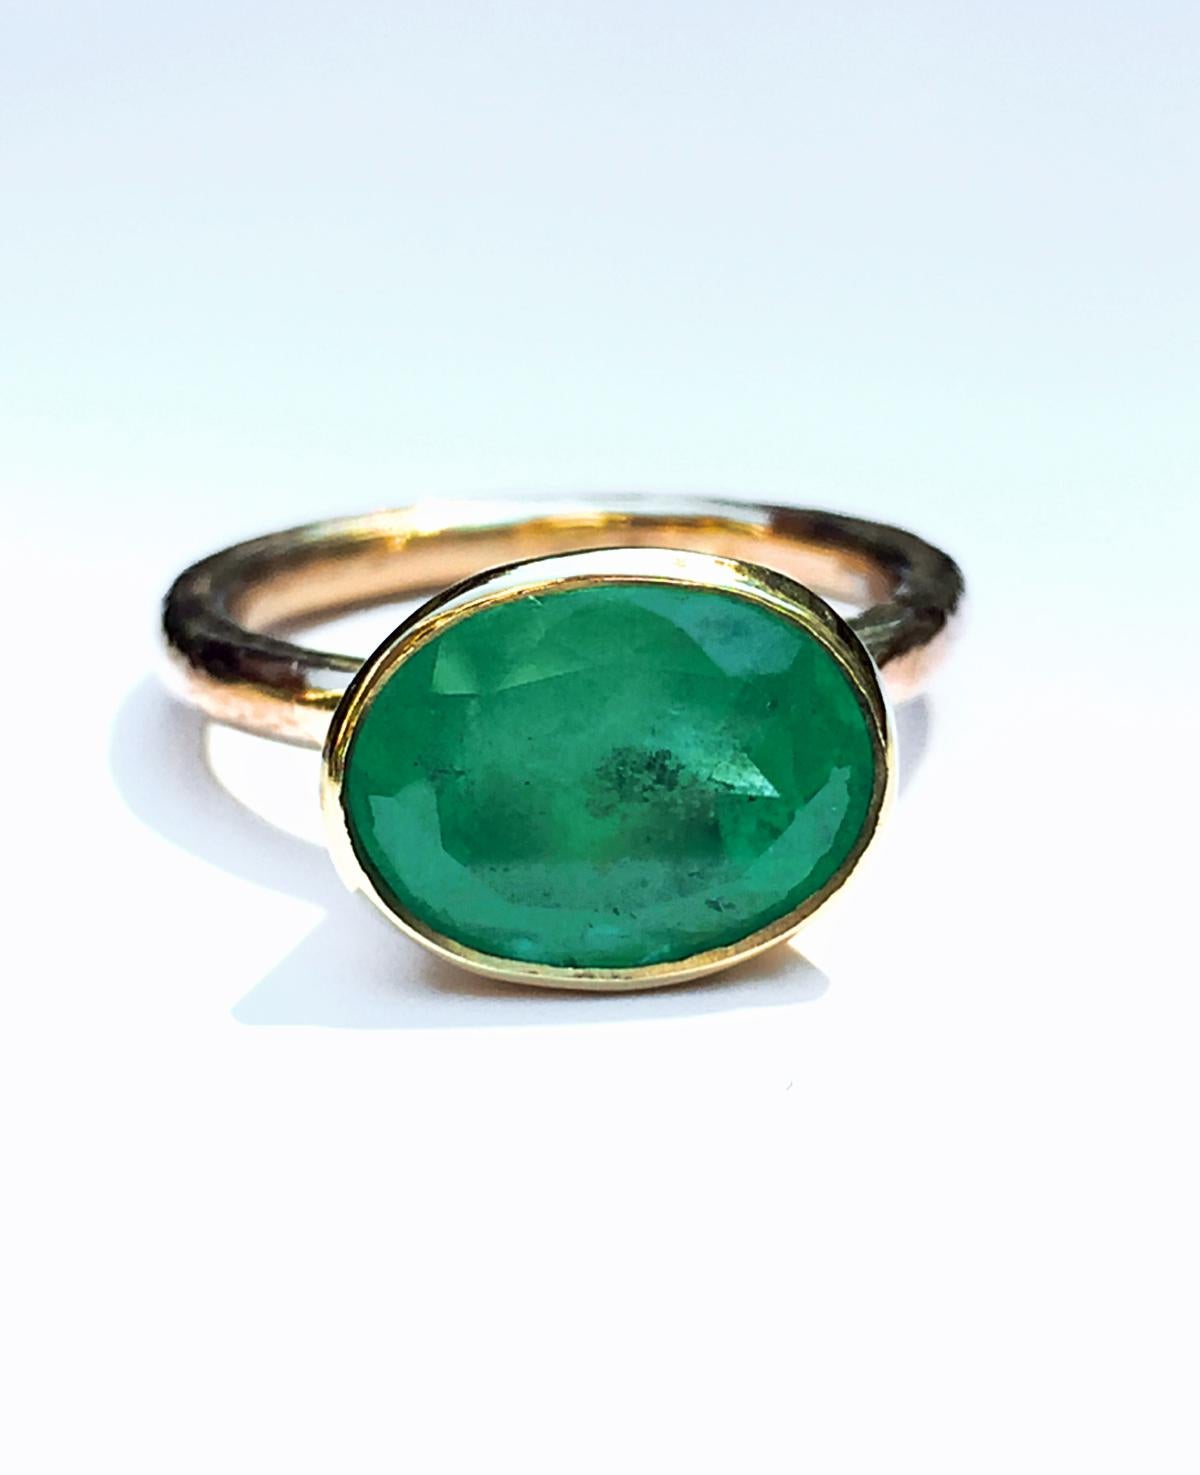 Oval Cut Rare Hammered Yellow Gold Emerald Ring Big 4.80 Carat Natural Colombian Emerald